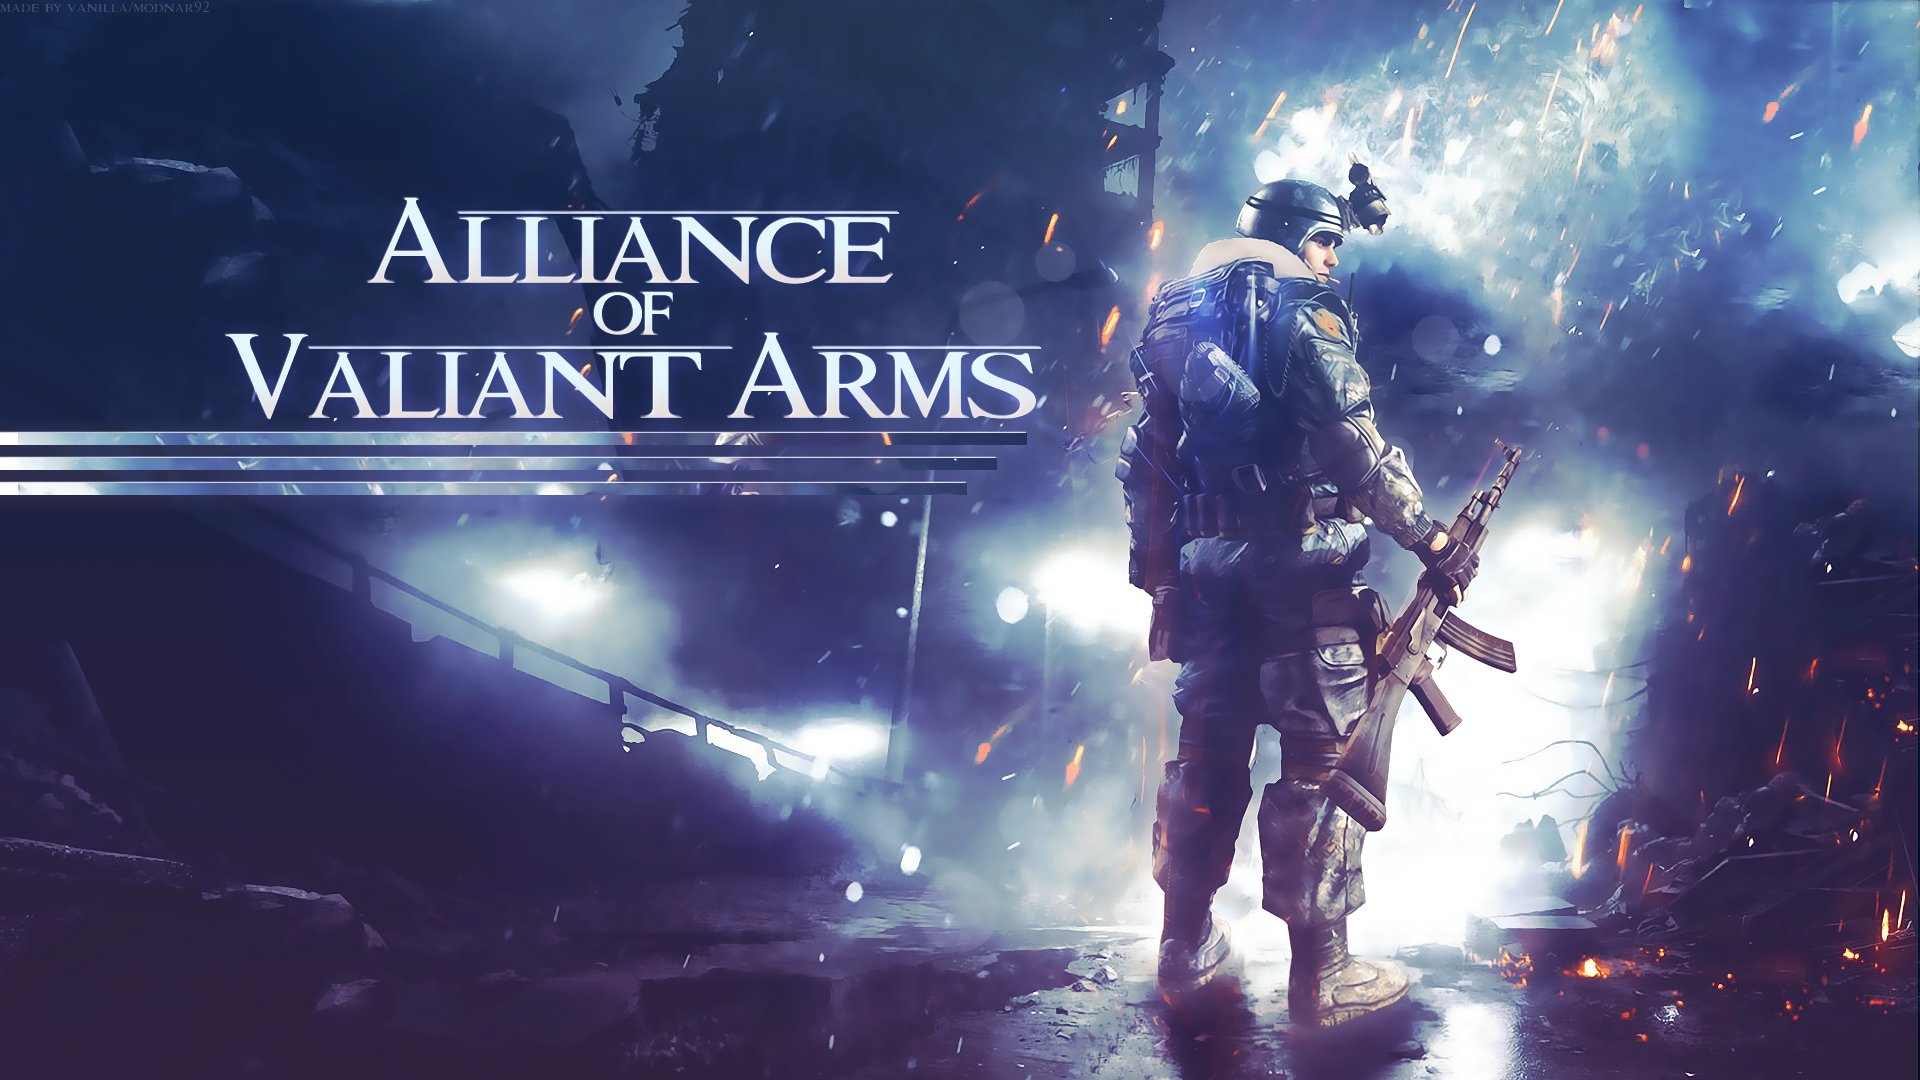 alliance of valiant arms, Shooter, Action, Warrior, Weapon, Online, Mmo, Alliance, Valiant, Arms,  11 Wallpaper